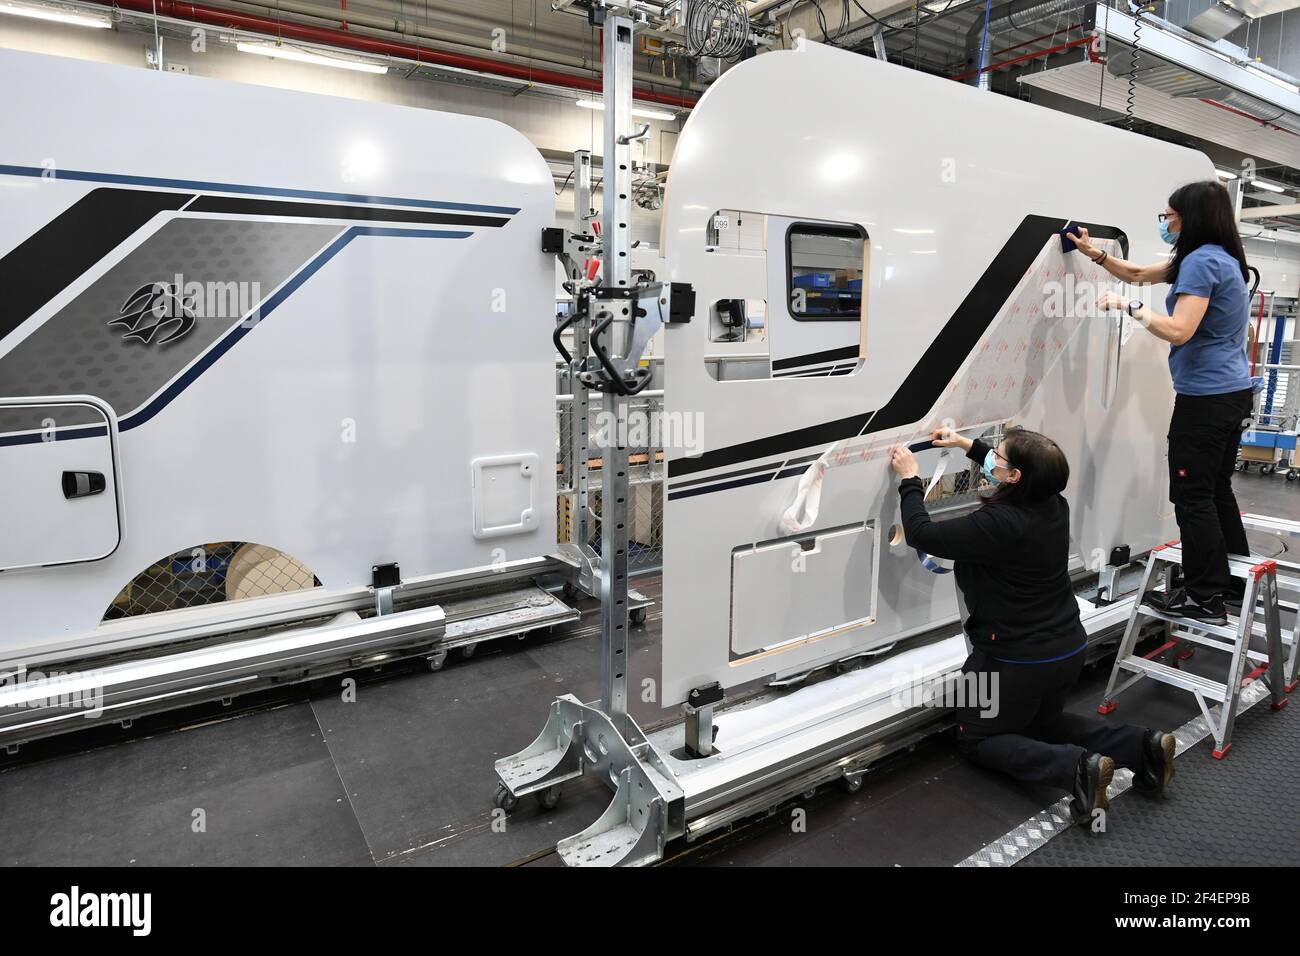 Workers add decals on camper walls at the Knaus-Tabbert AG factory in  Jandelsbrunn near Passau, Germany, March 16, 2021. Picture taken March 16,  2021. REUTERS/Andreas Gebert Stock Photo - Alamy